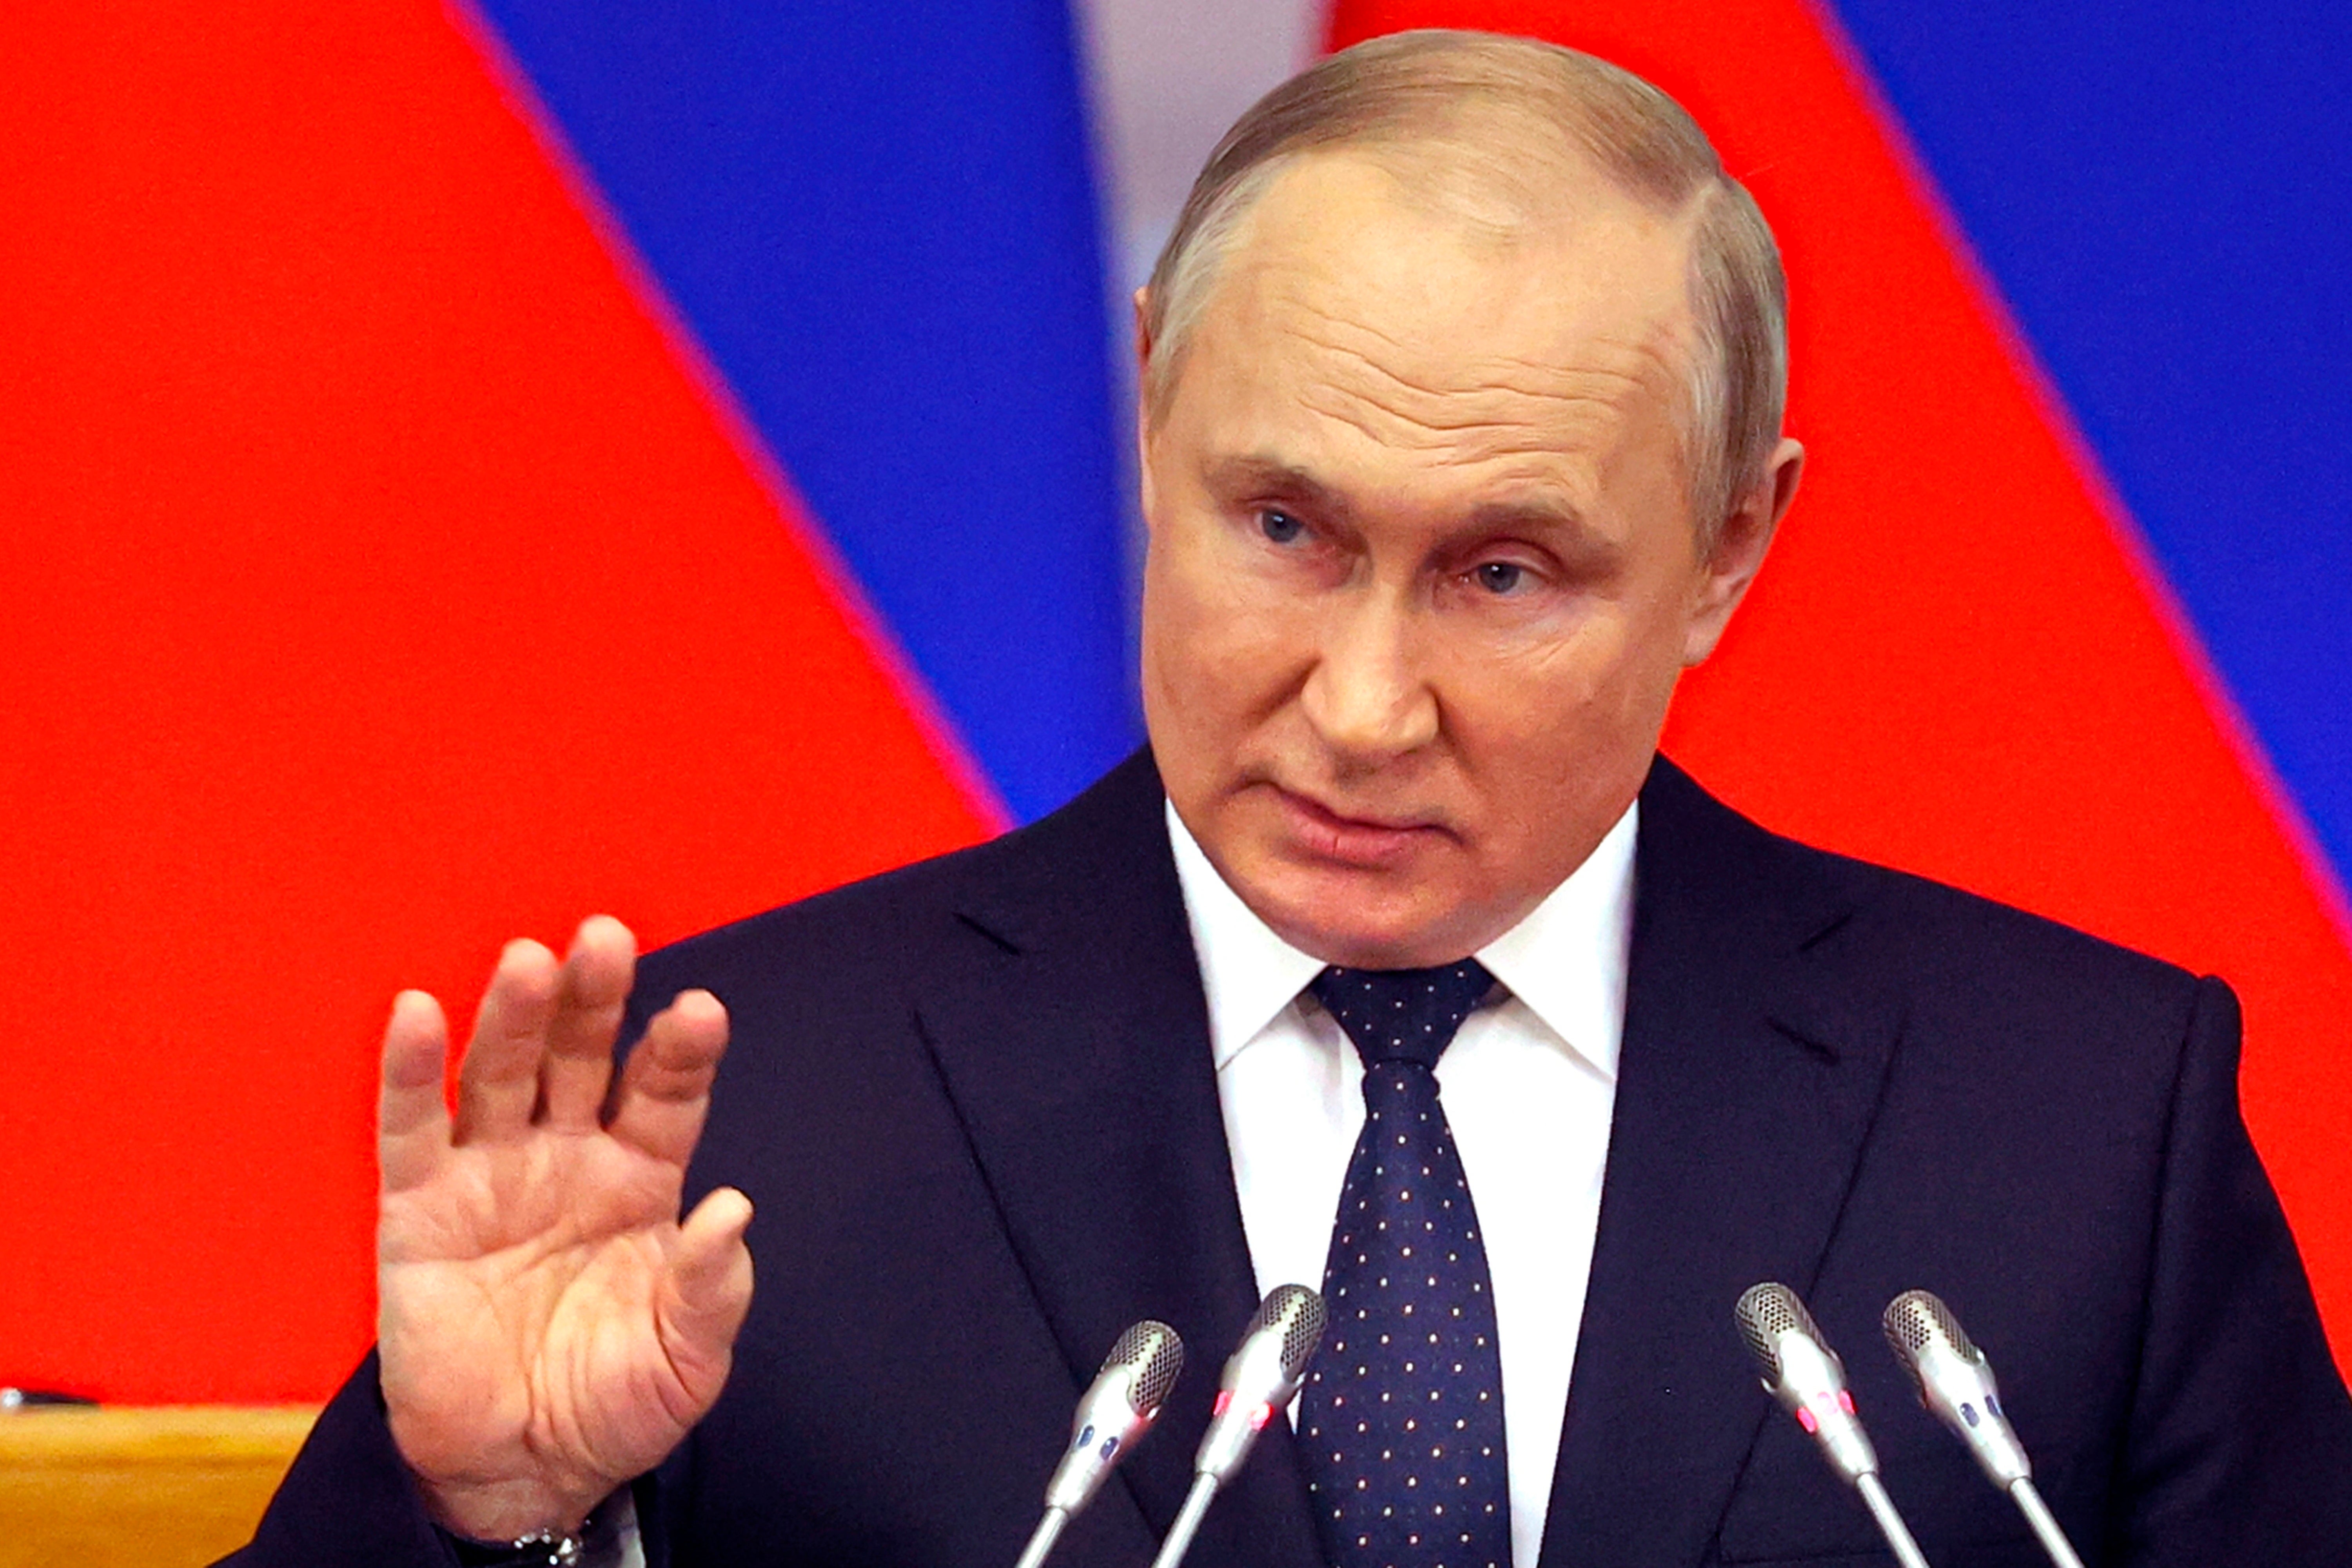 Vladimir Putin has threatened to cut off gas to other countries